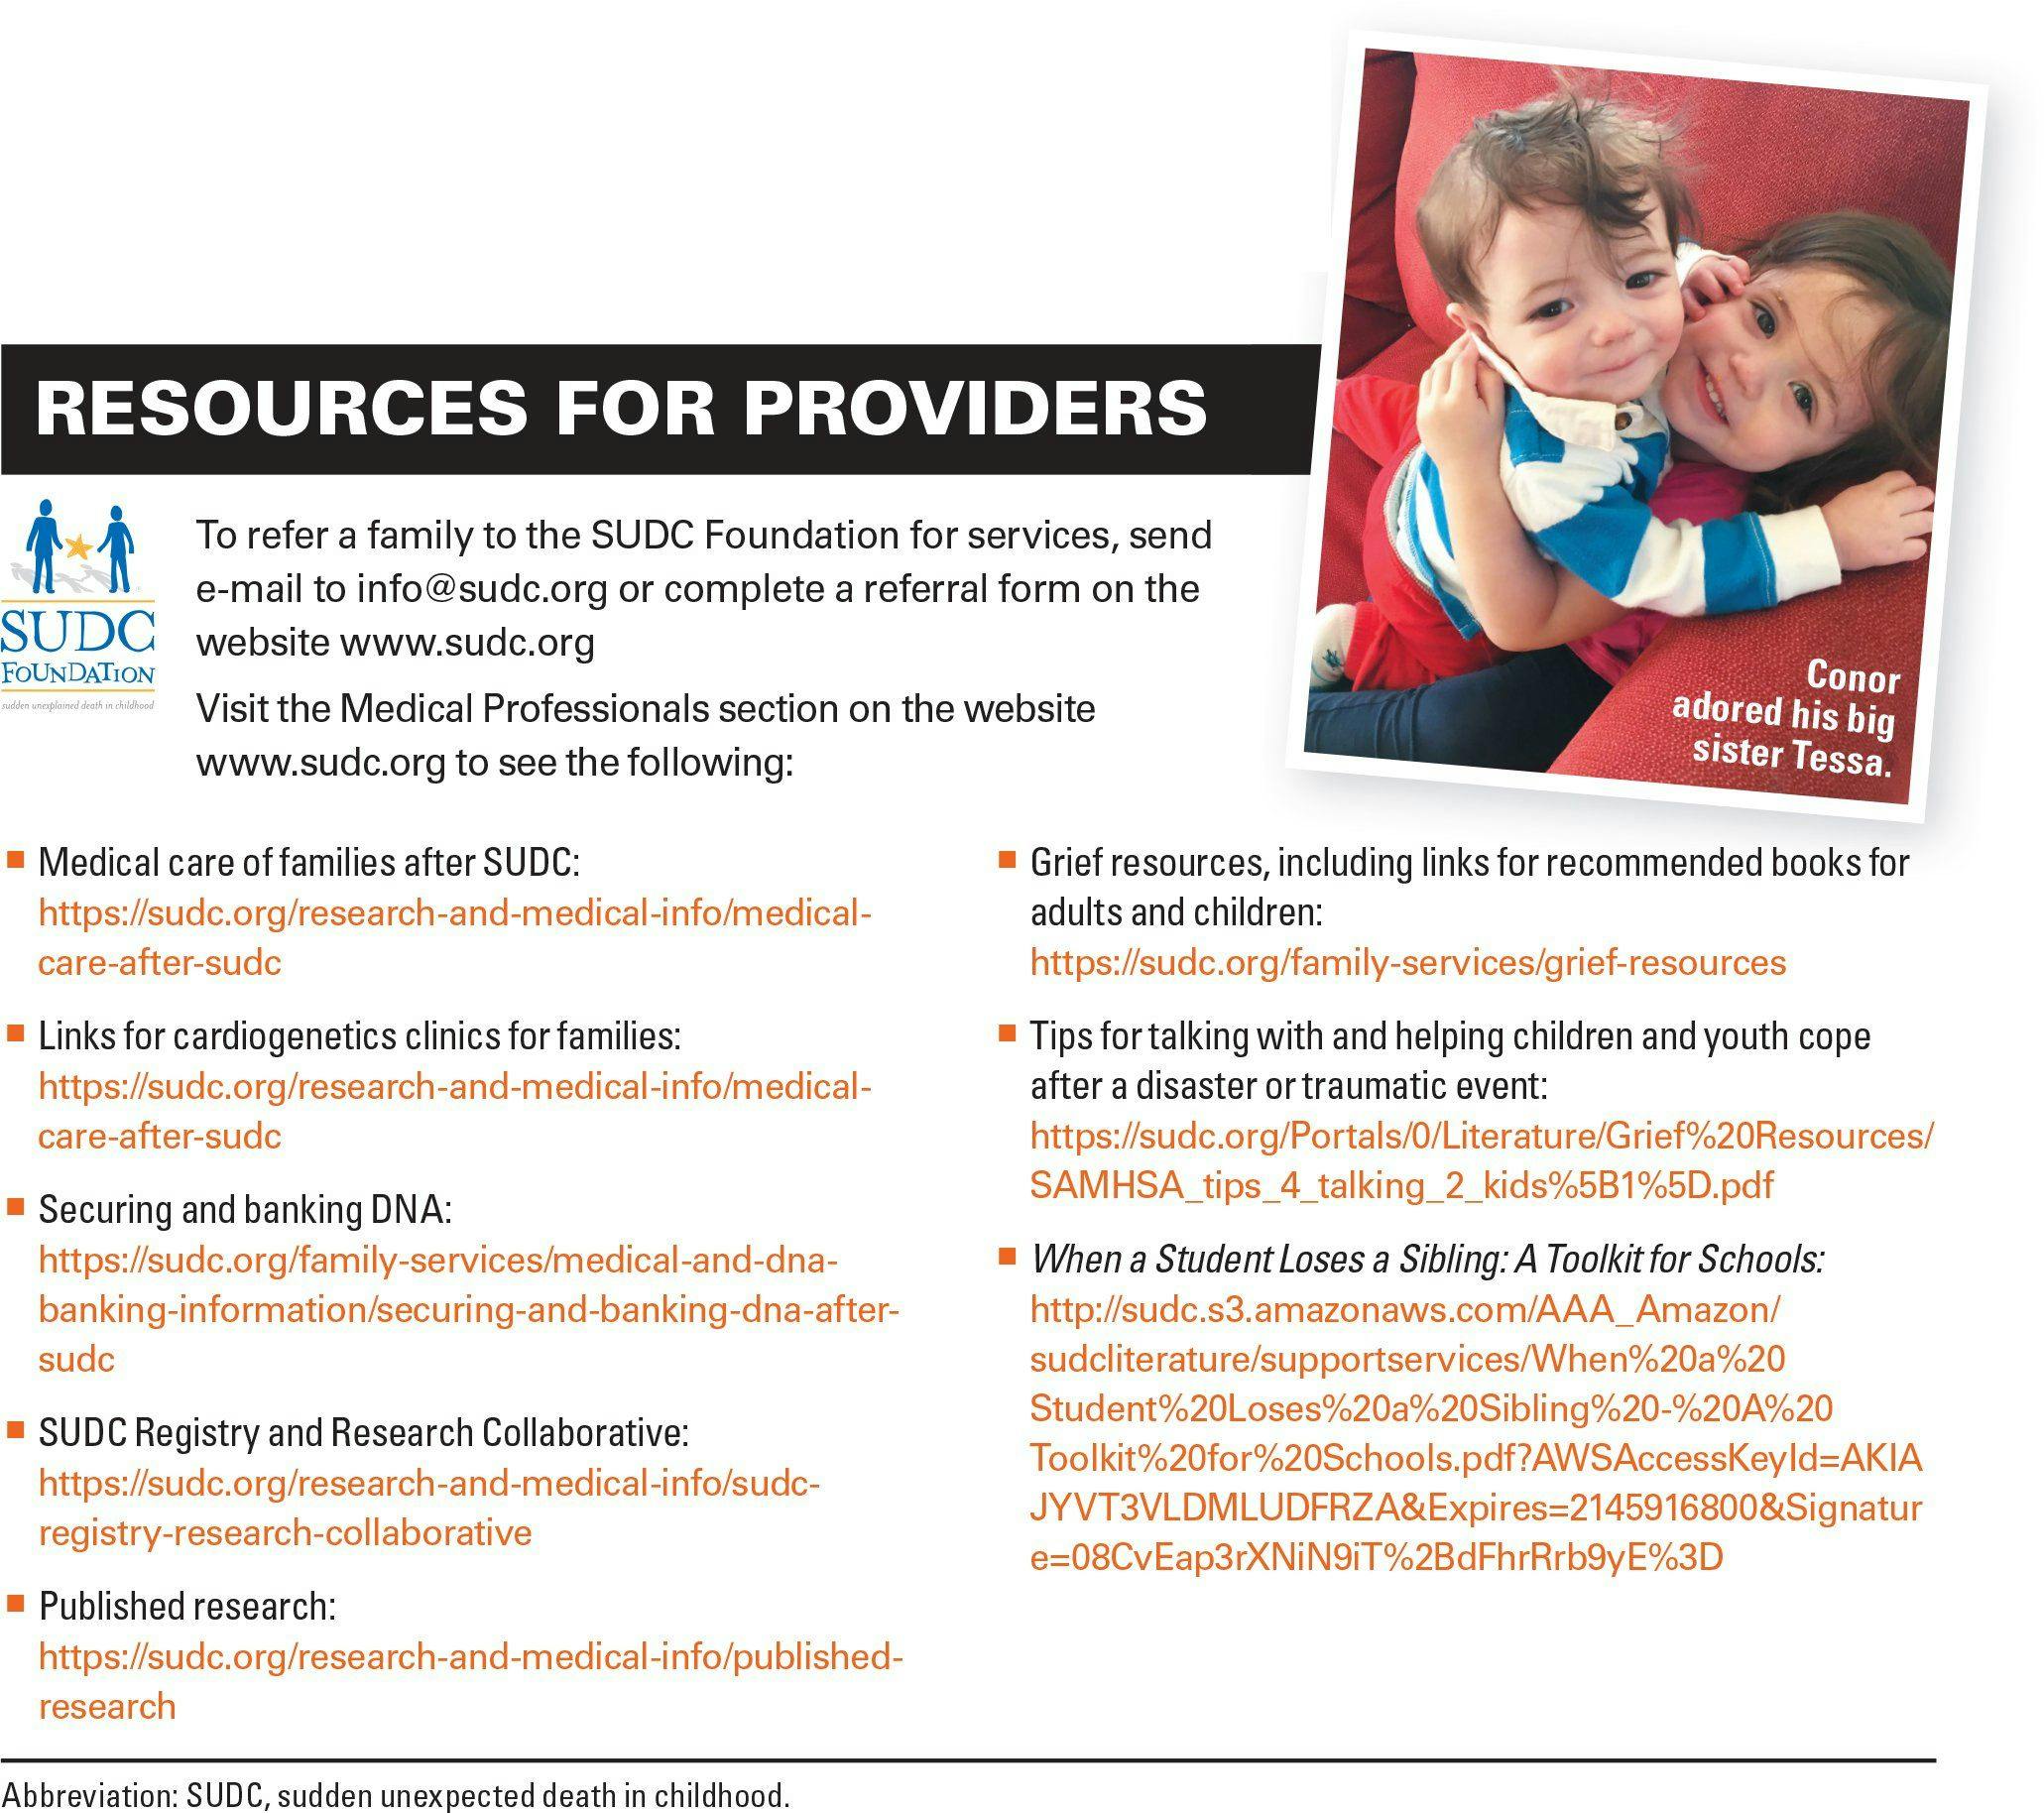 Resources for providers